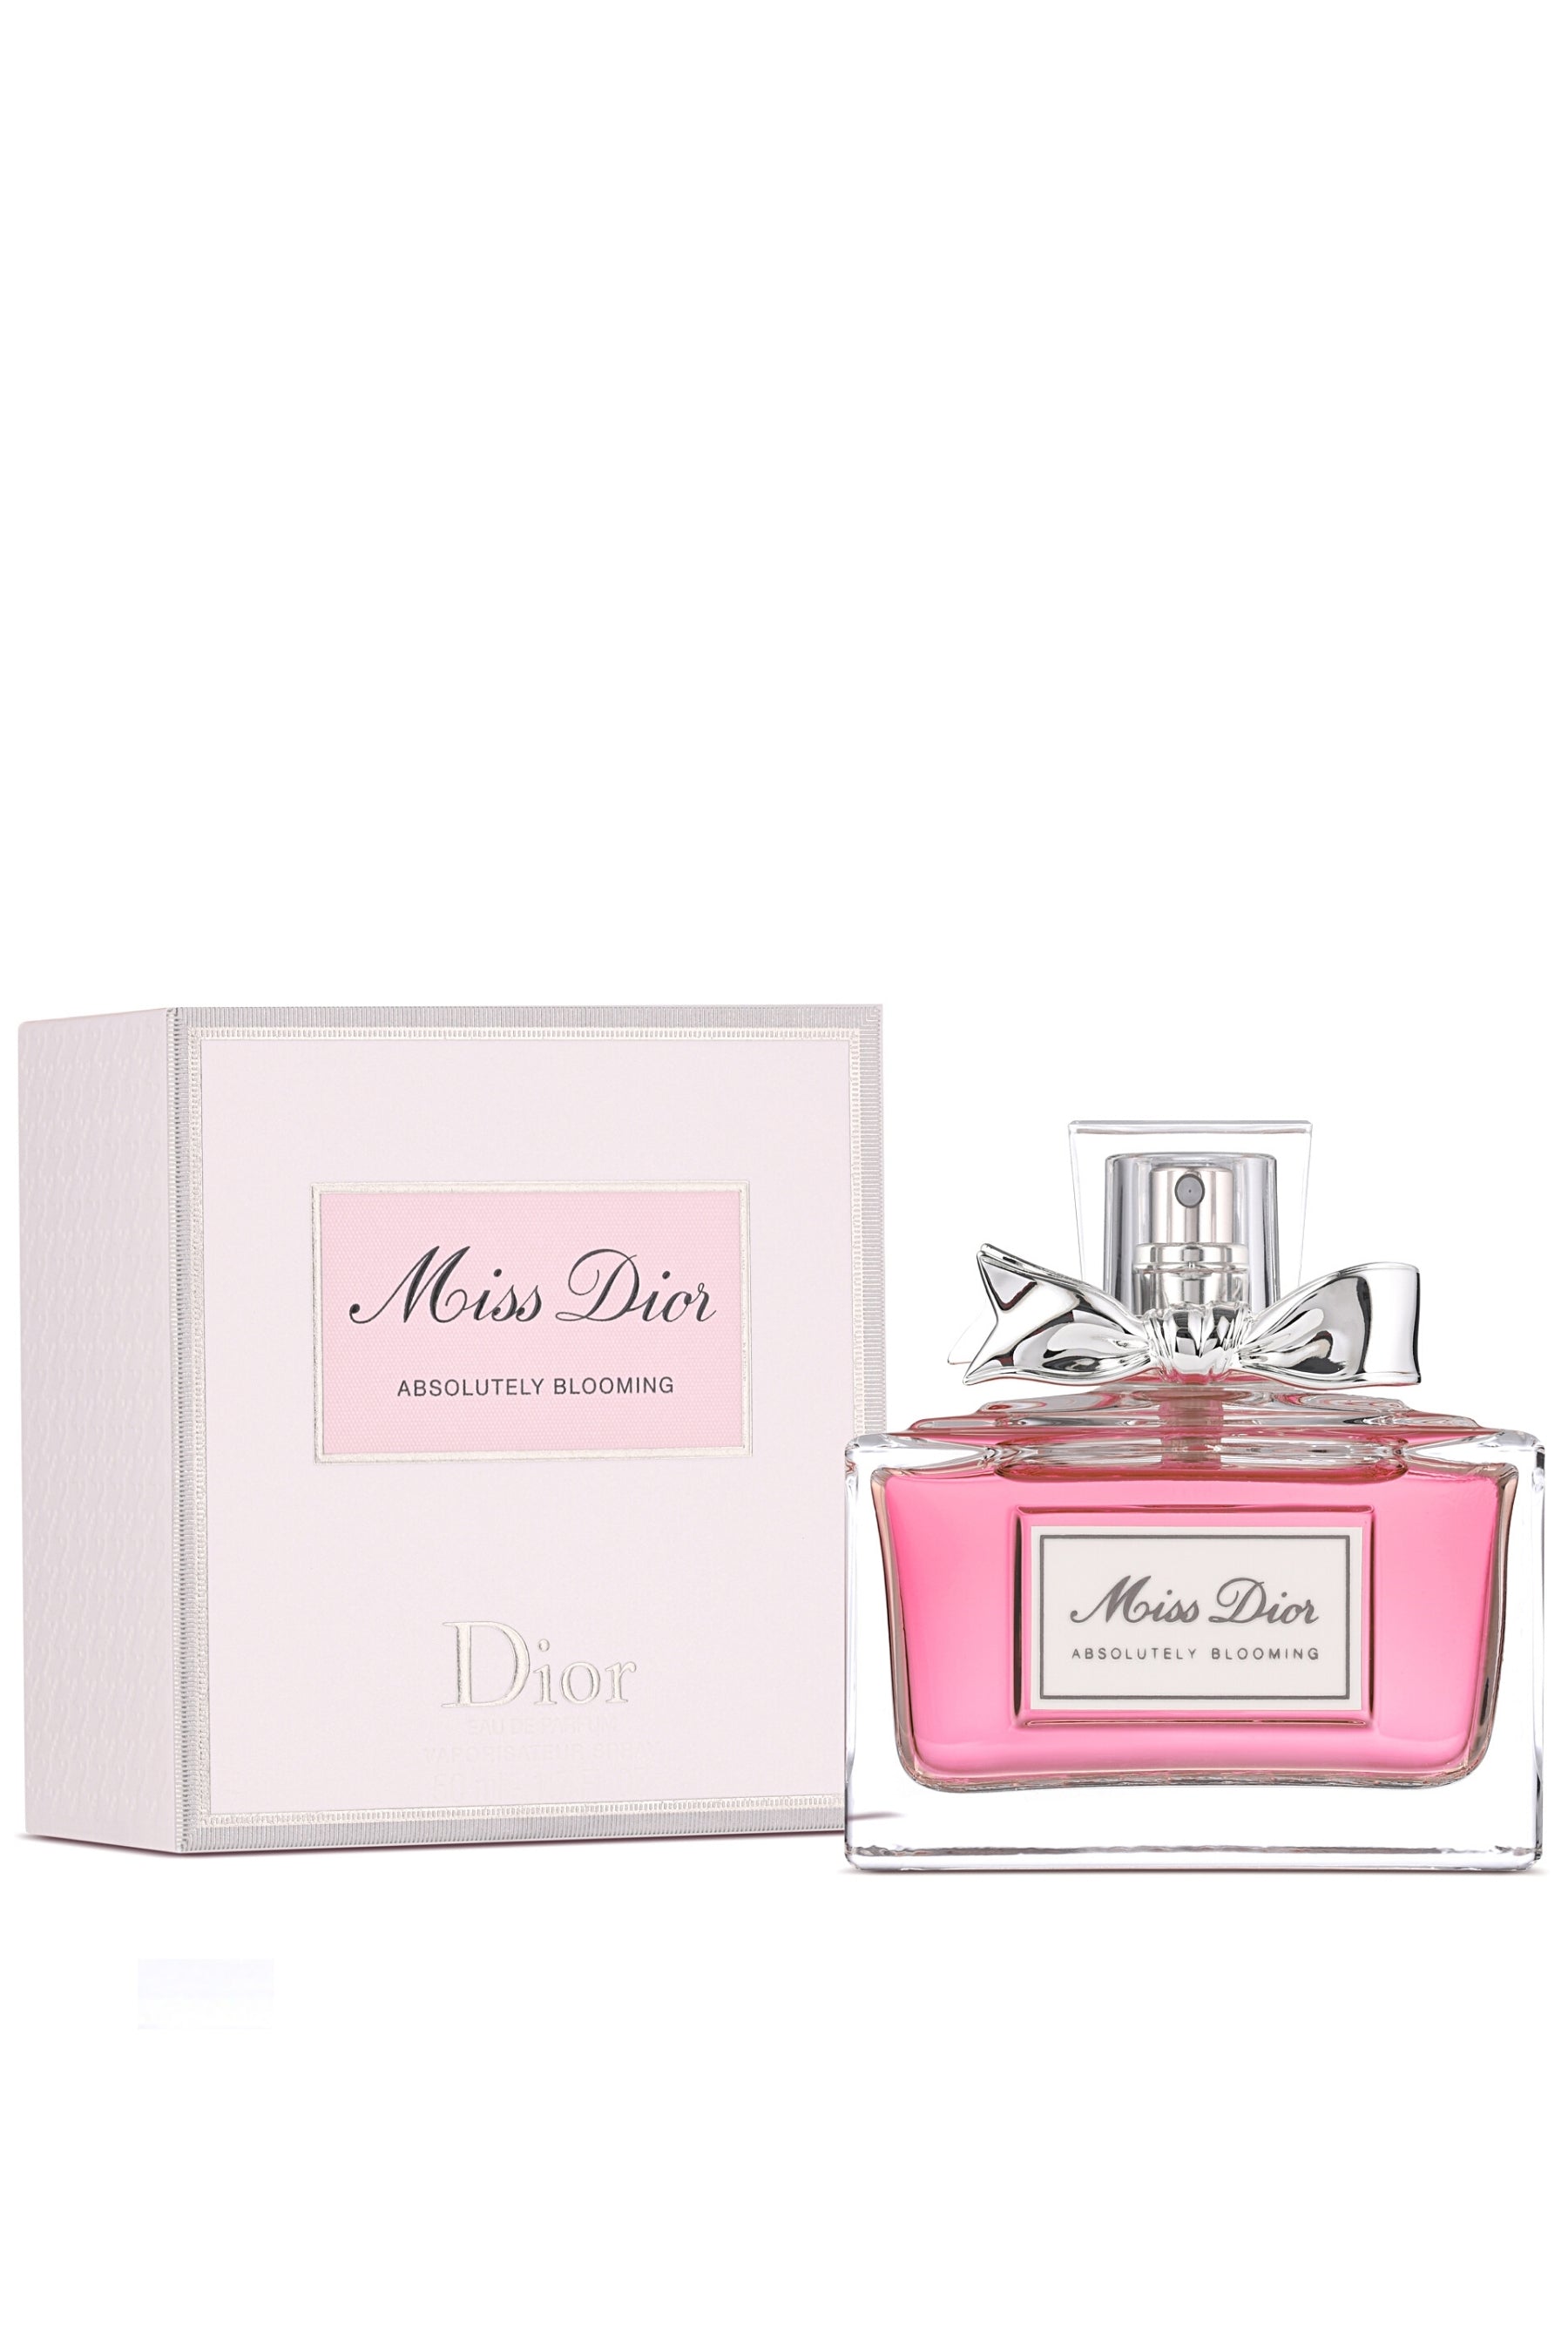 Miss Dior Absolutely Blooming by Christian Dior for Women